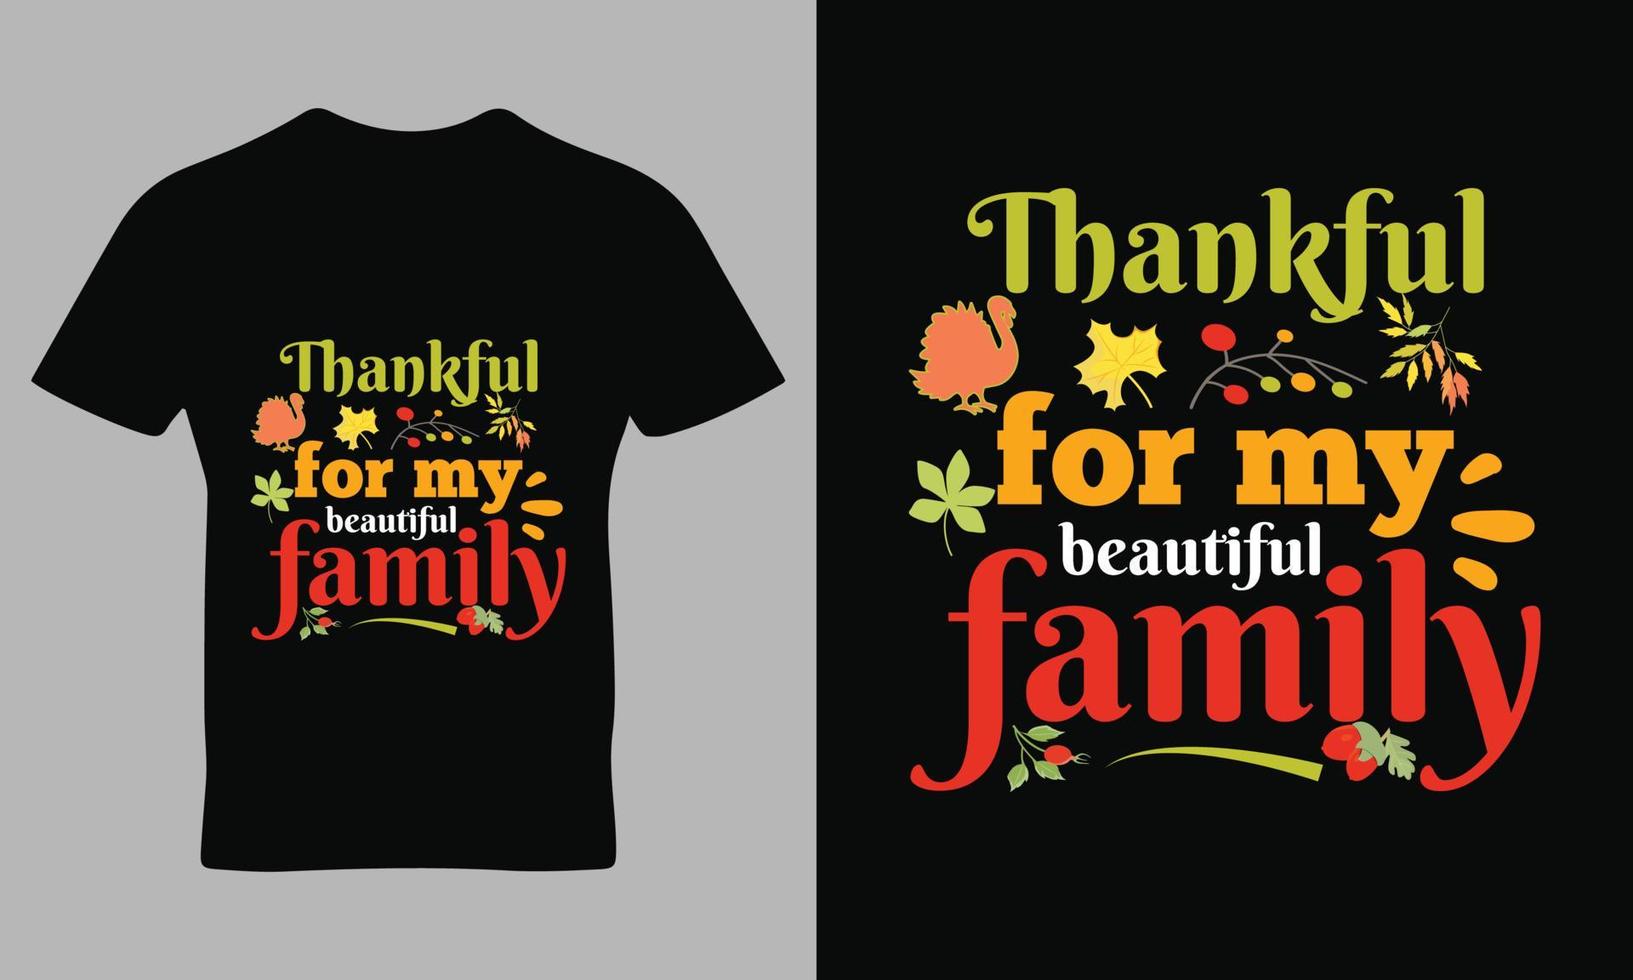 Thanks giving quote typography t-shirt design template vector